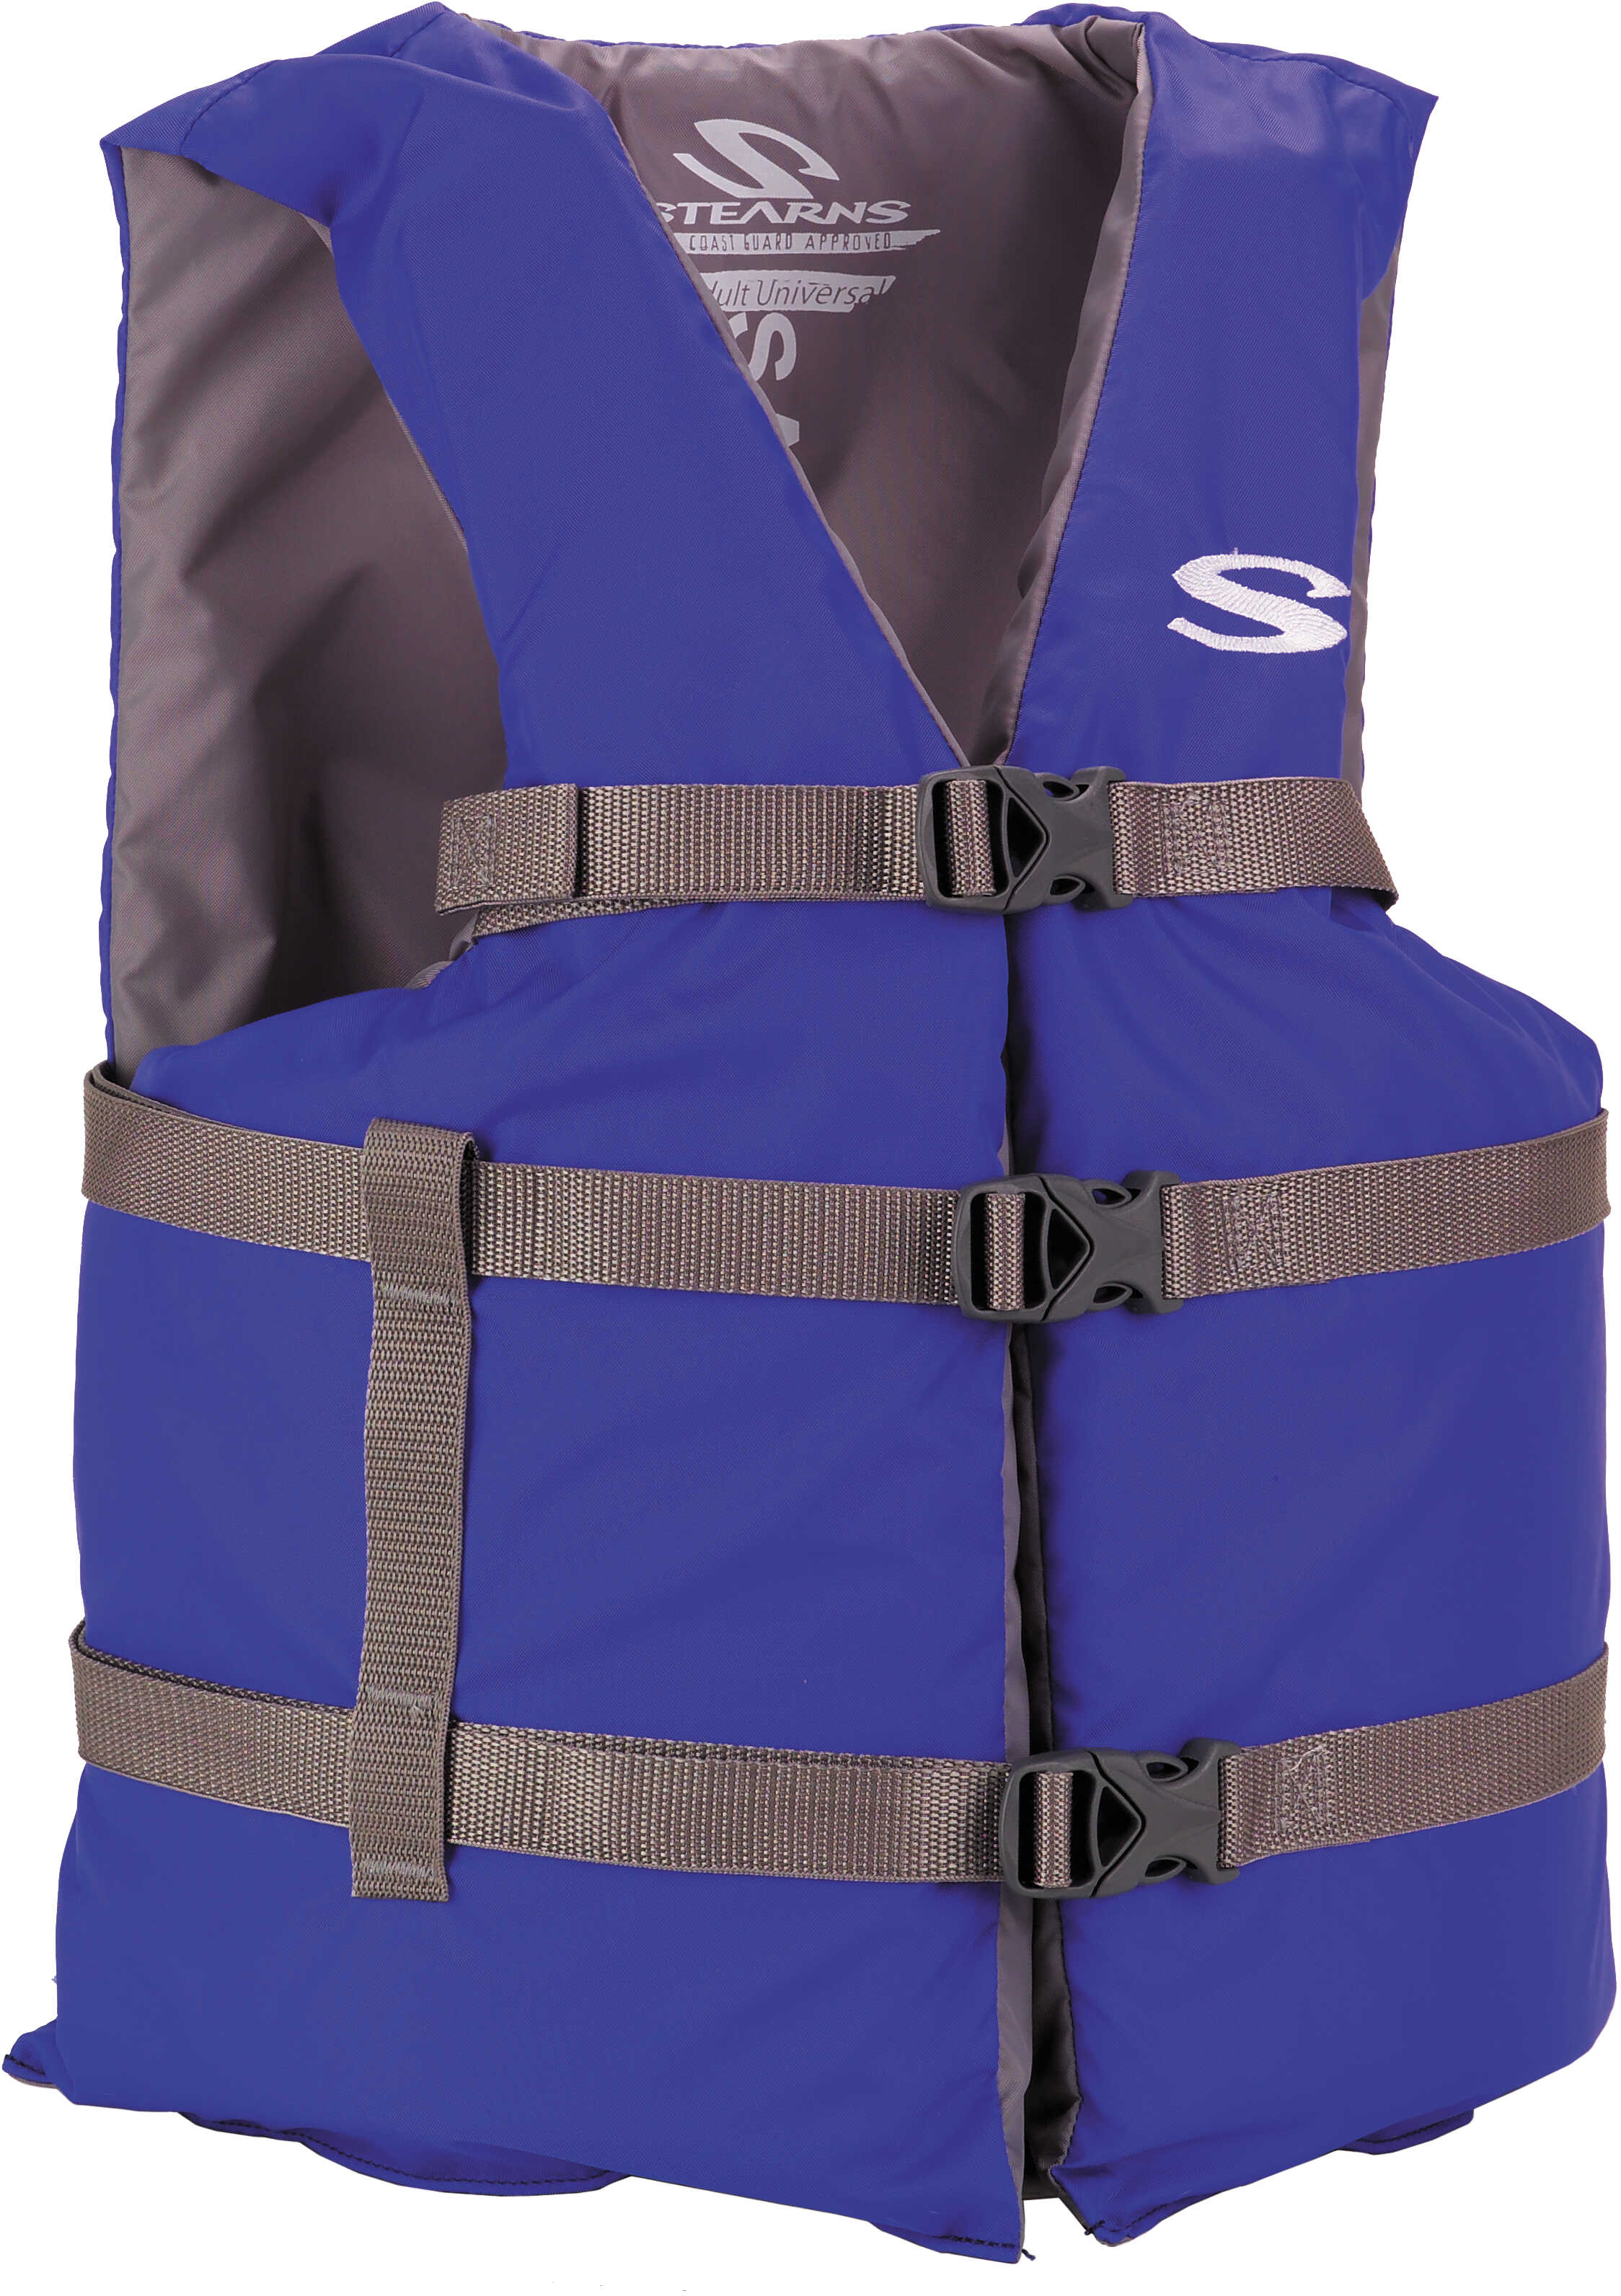 Stearns Adult Classic Boating PFD Universal, Blue Md: 3000001684